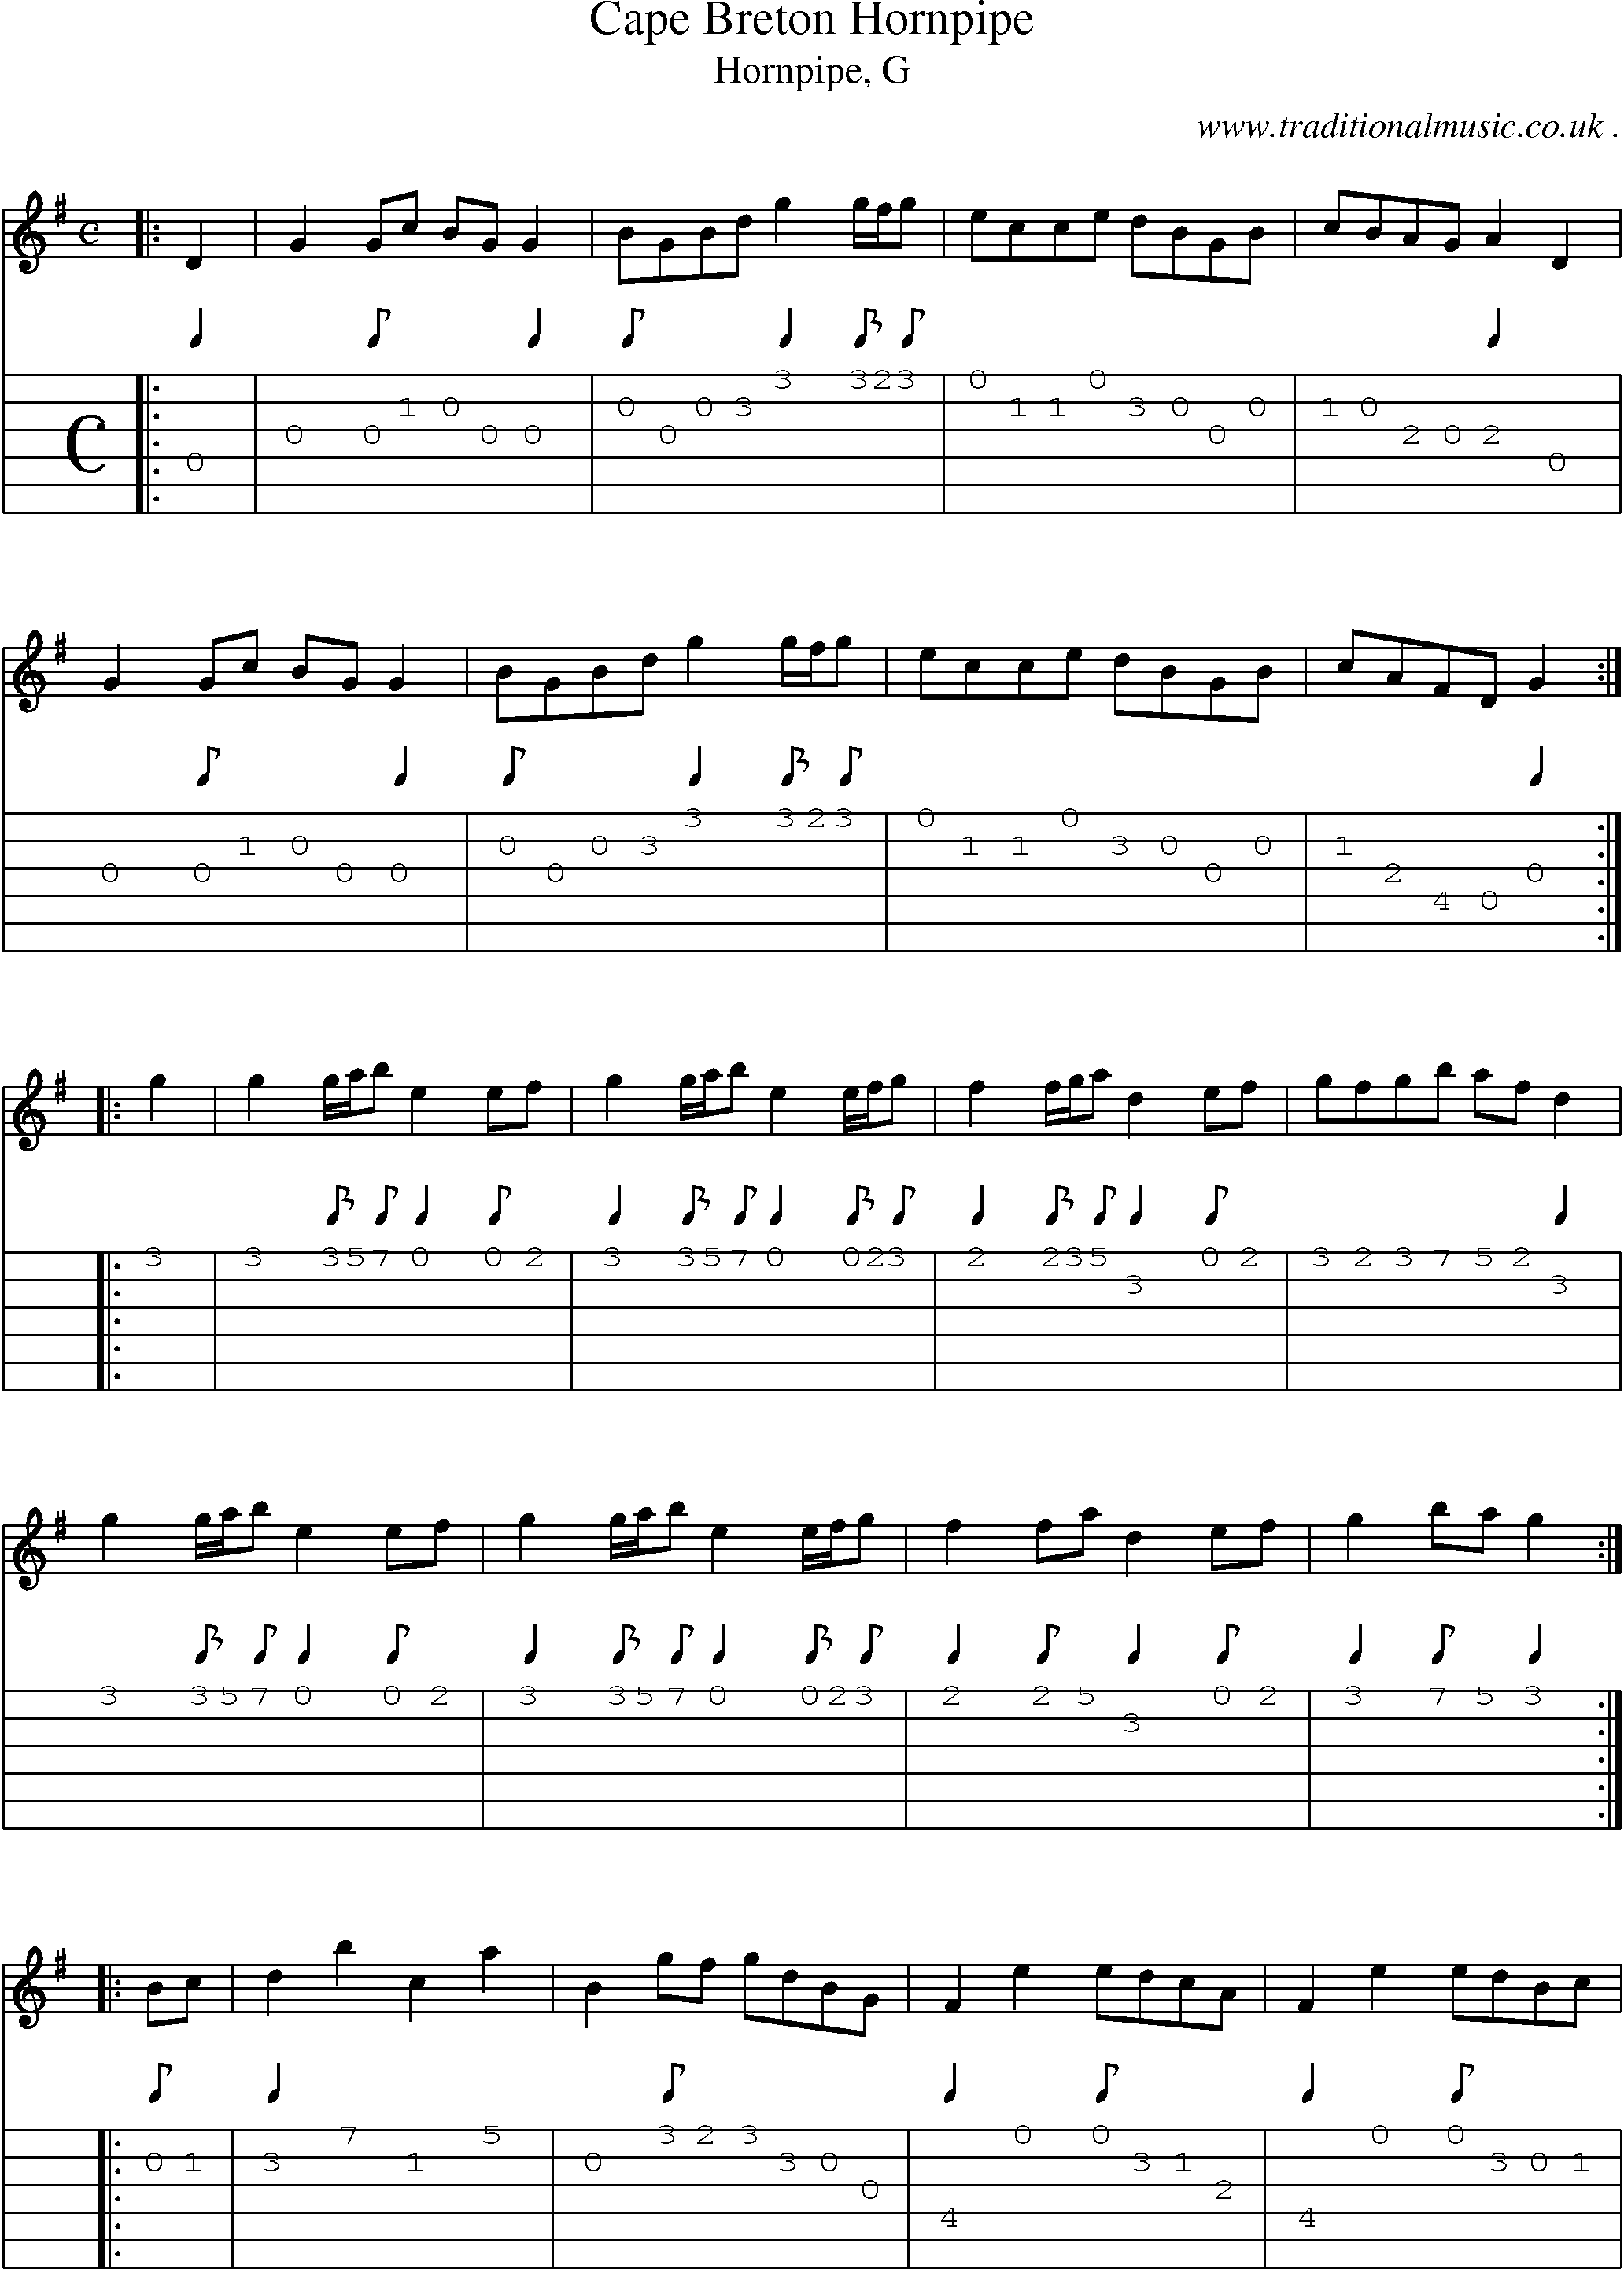 Sheet-music  score, Chords and Guitar Tabs for Cape Breton Hornpipe